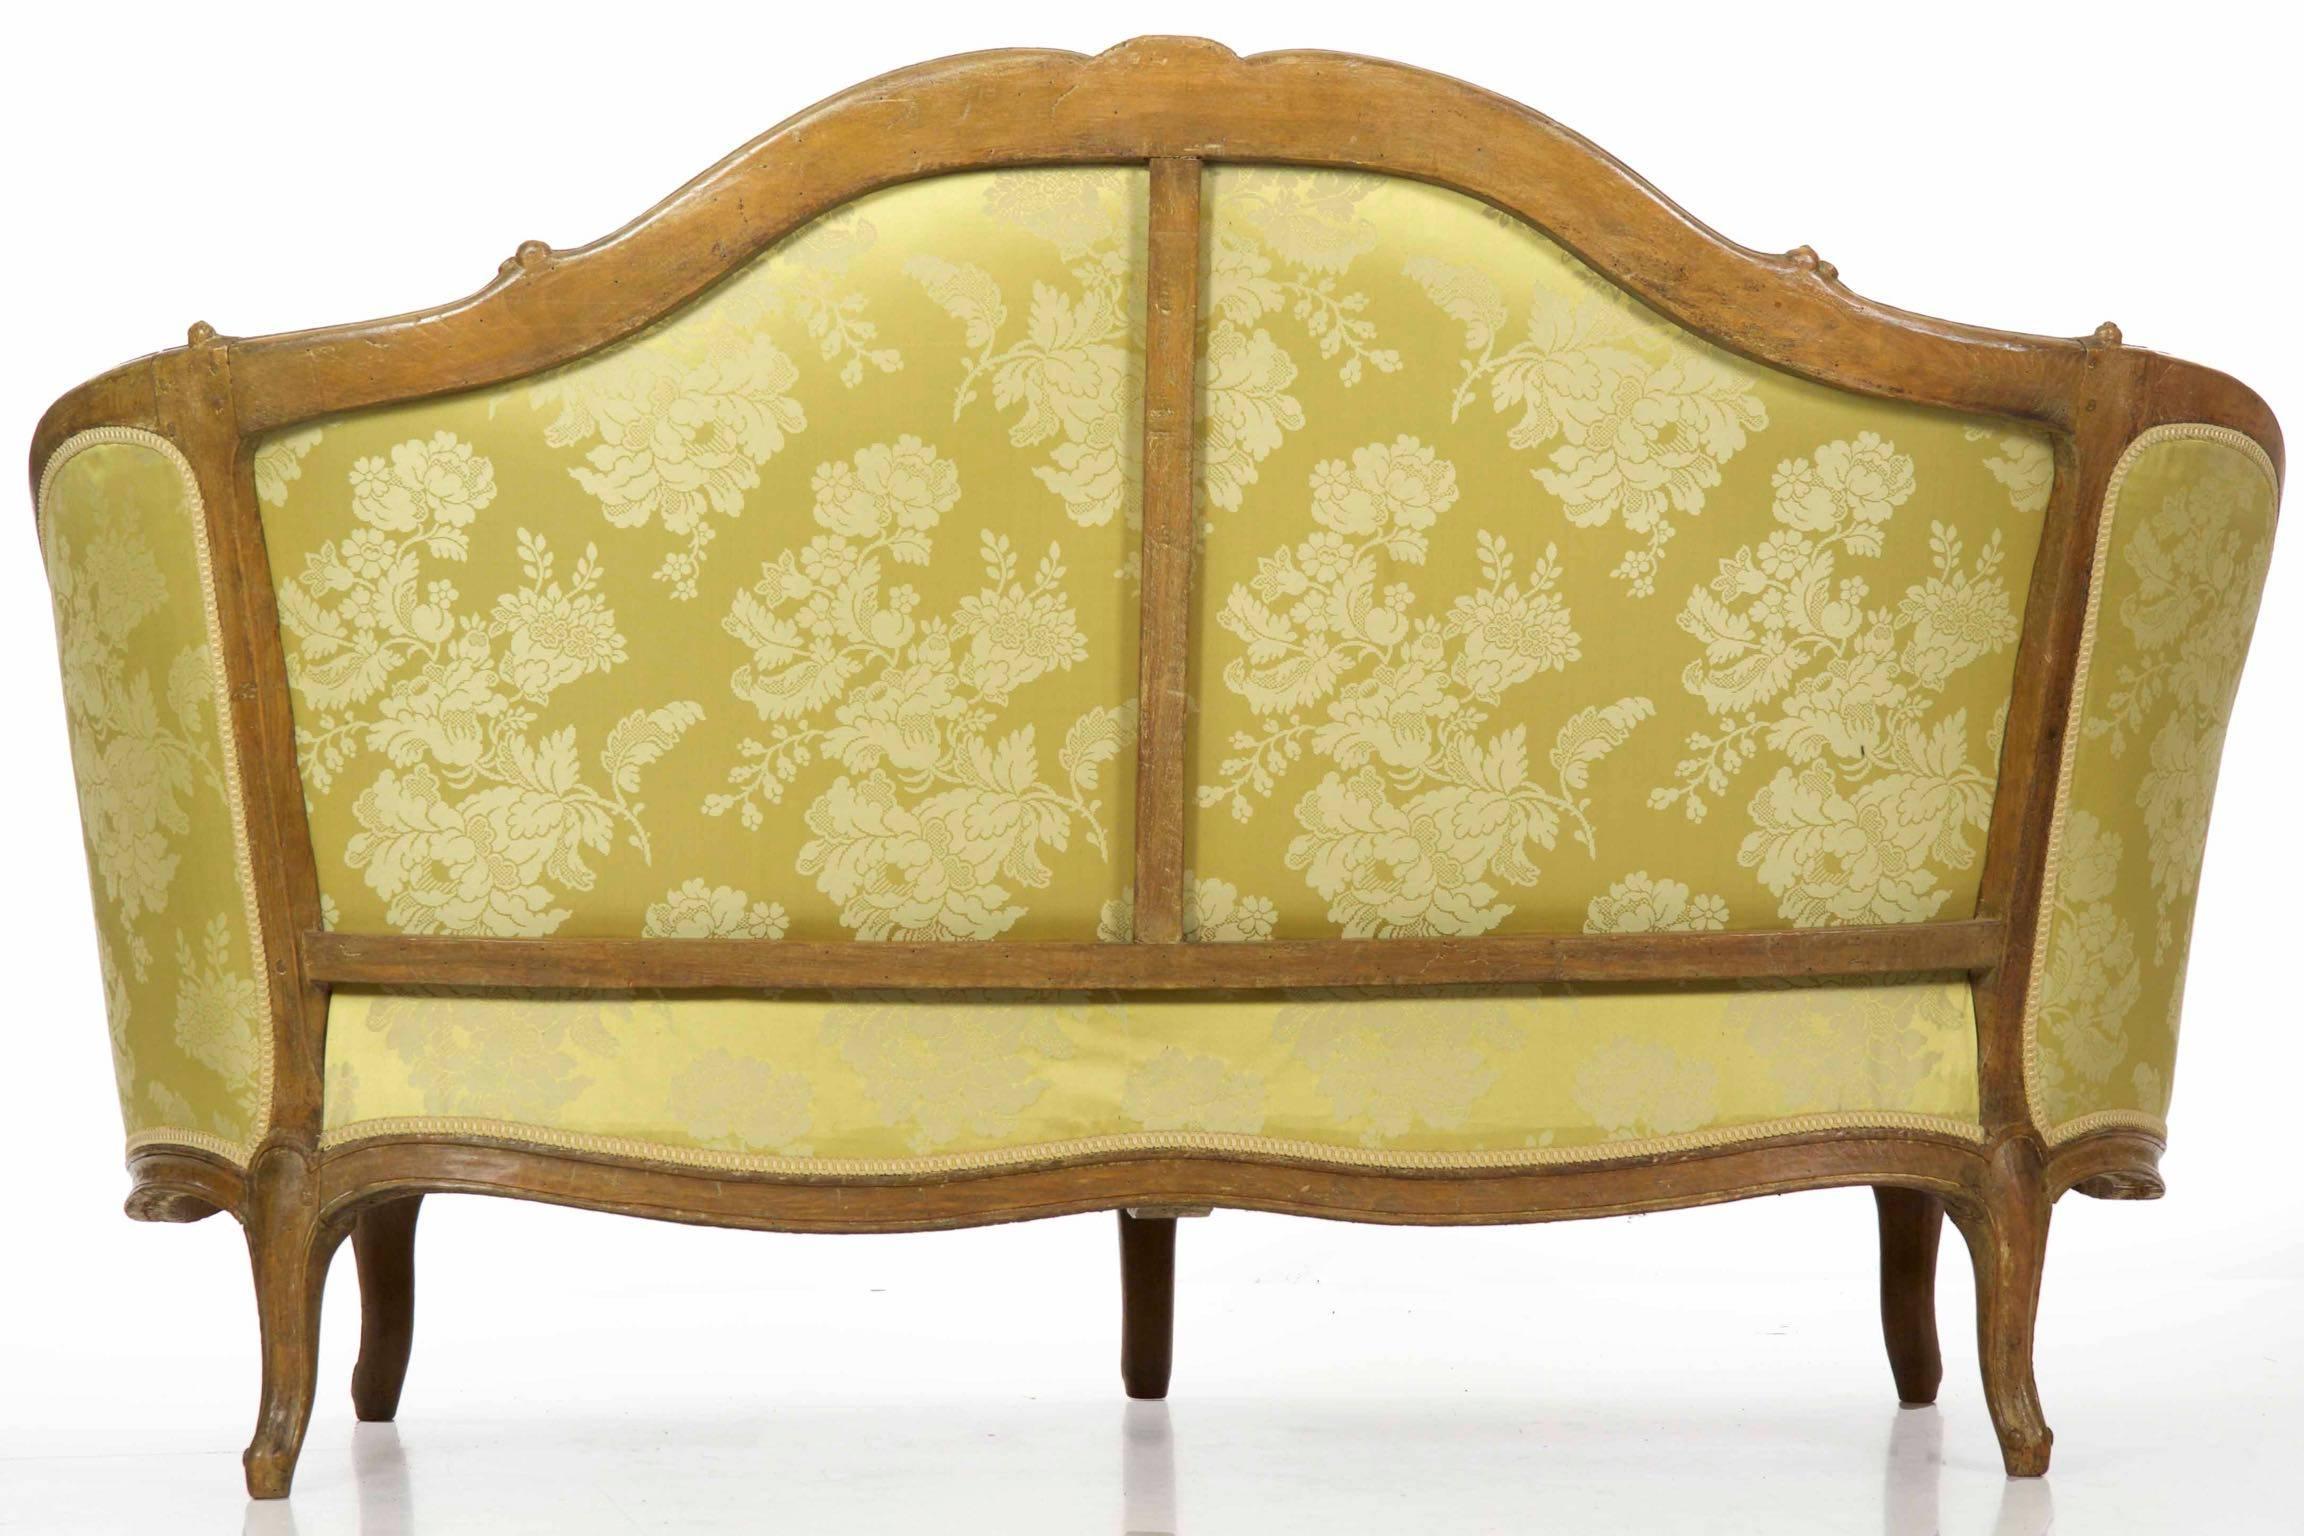 French Louis XV Period Carved Beechwood Antique Canapé, 18th Century